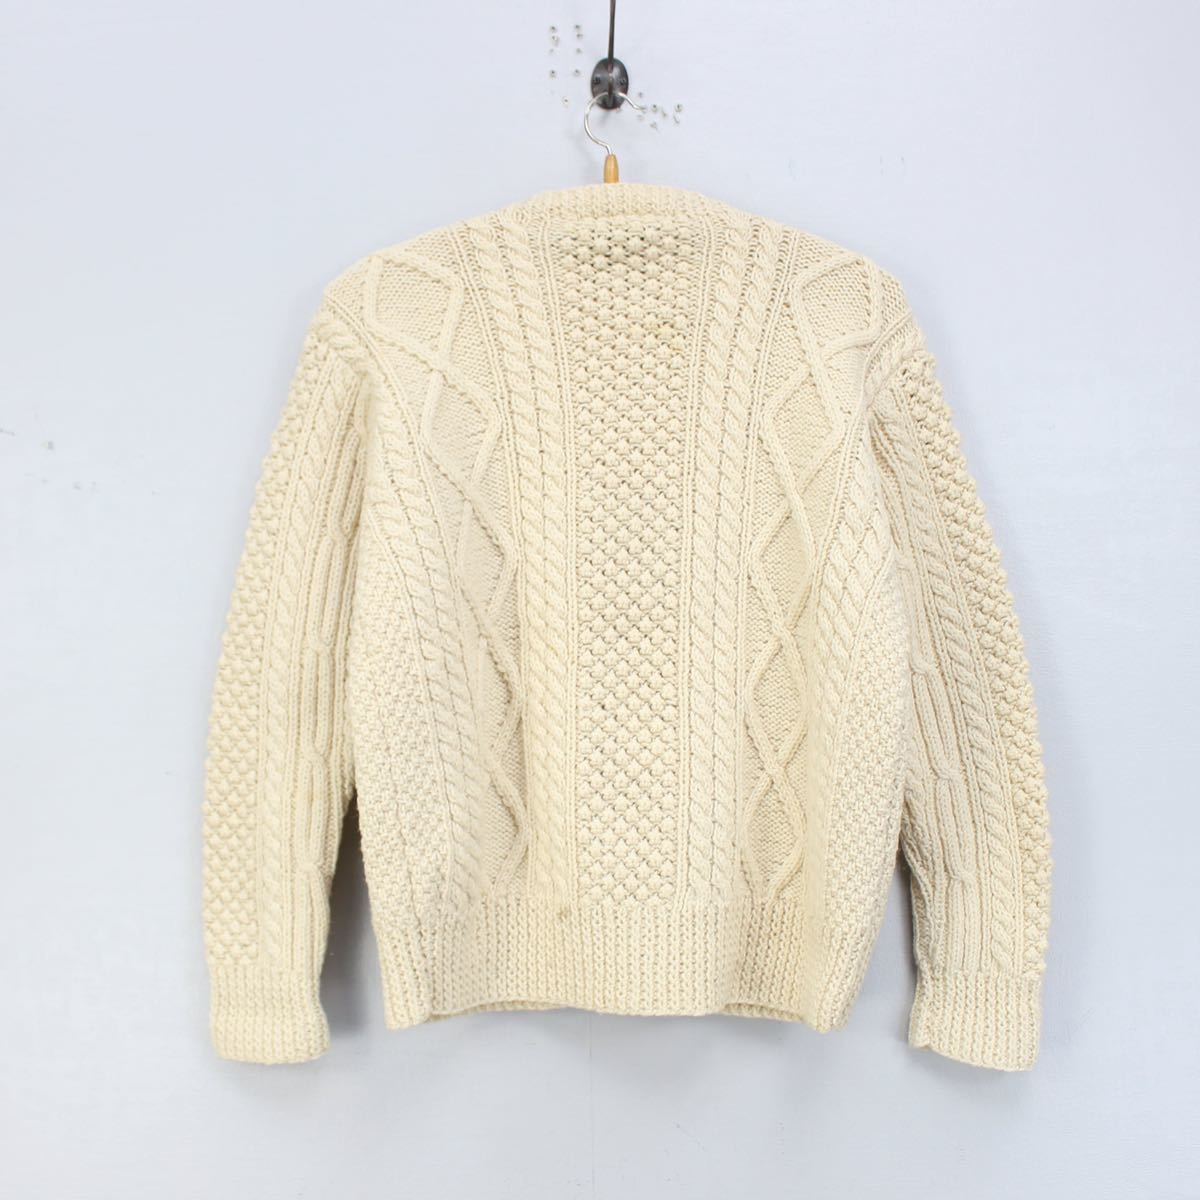 EU VINTAGE CABLE DESIGN KNIT CARDIGAN MADE IN IRELAND/ヨーロッパ